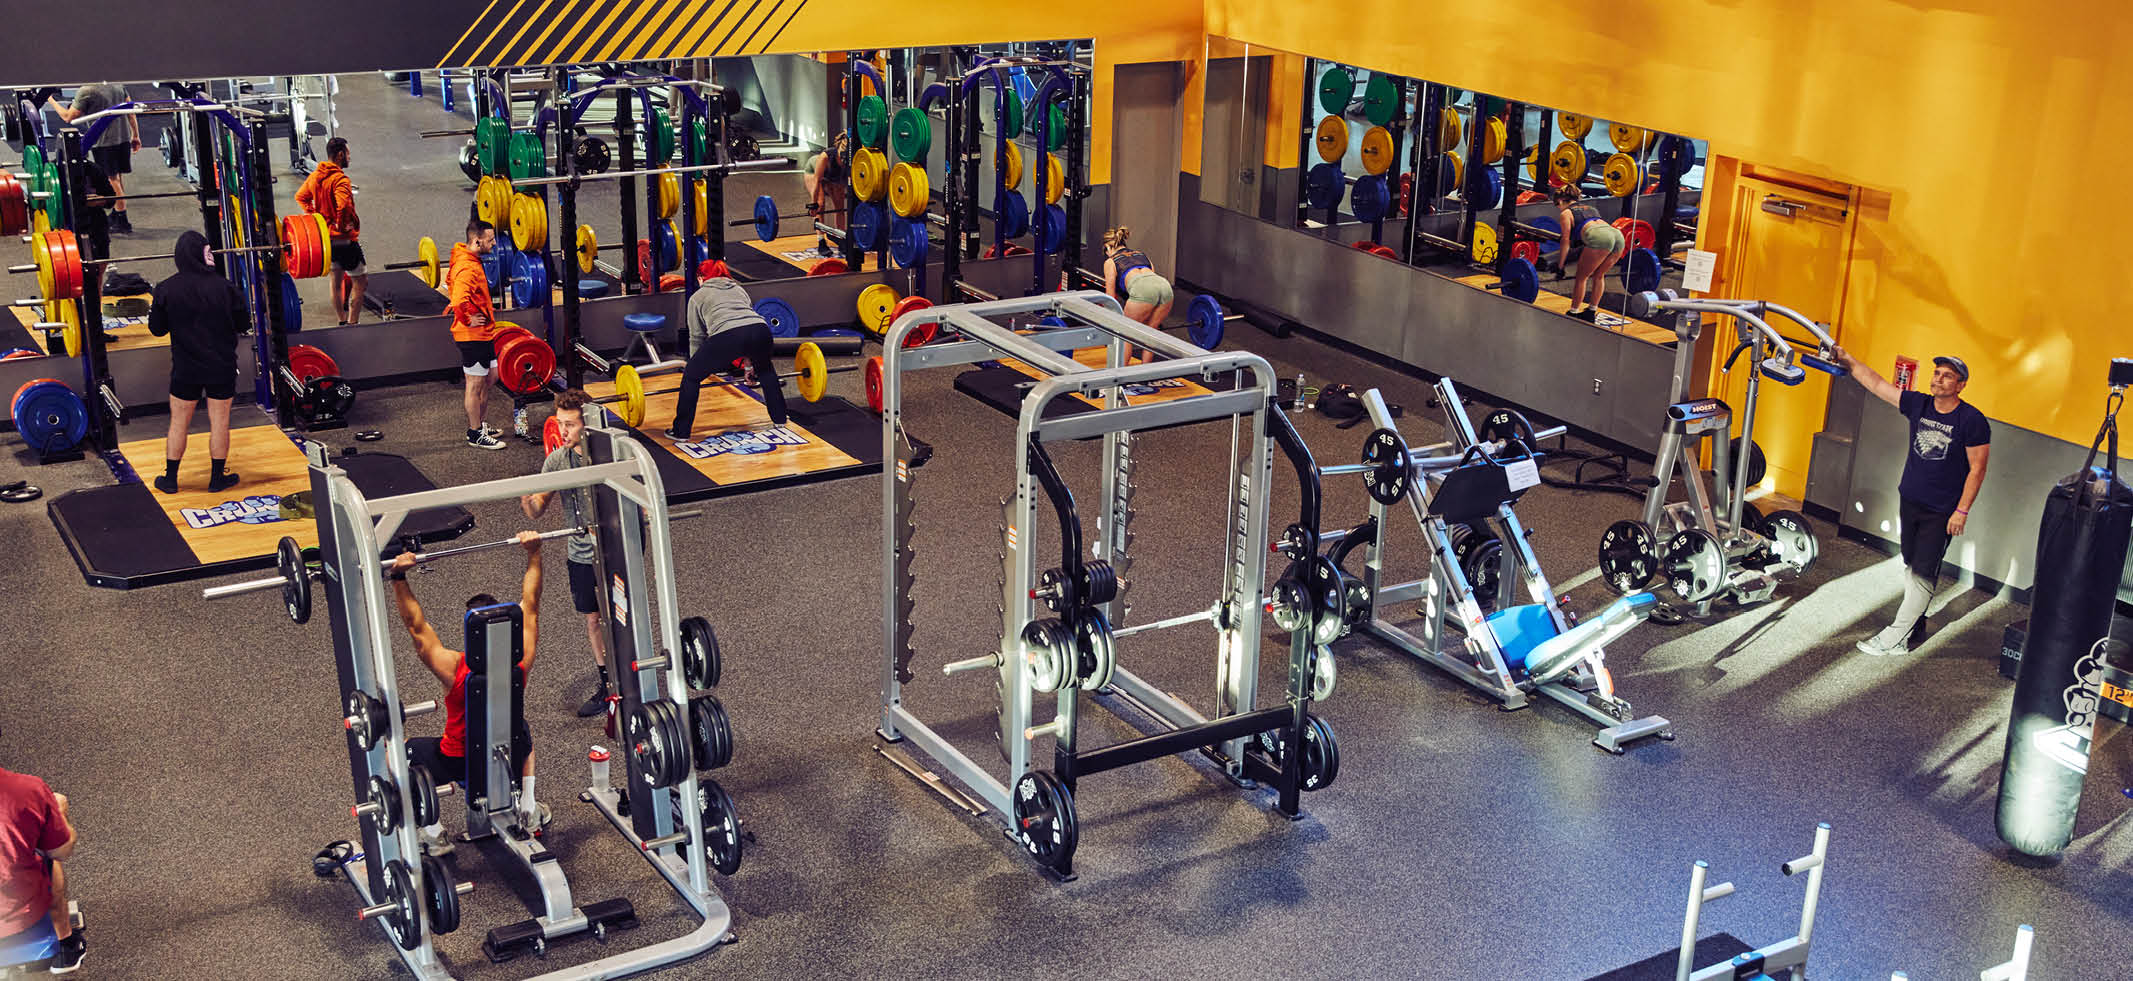 Can You Bring a Guest to Crunch Fitness? Discover the Perks!